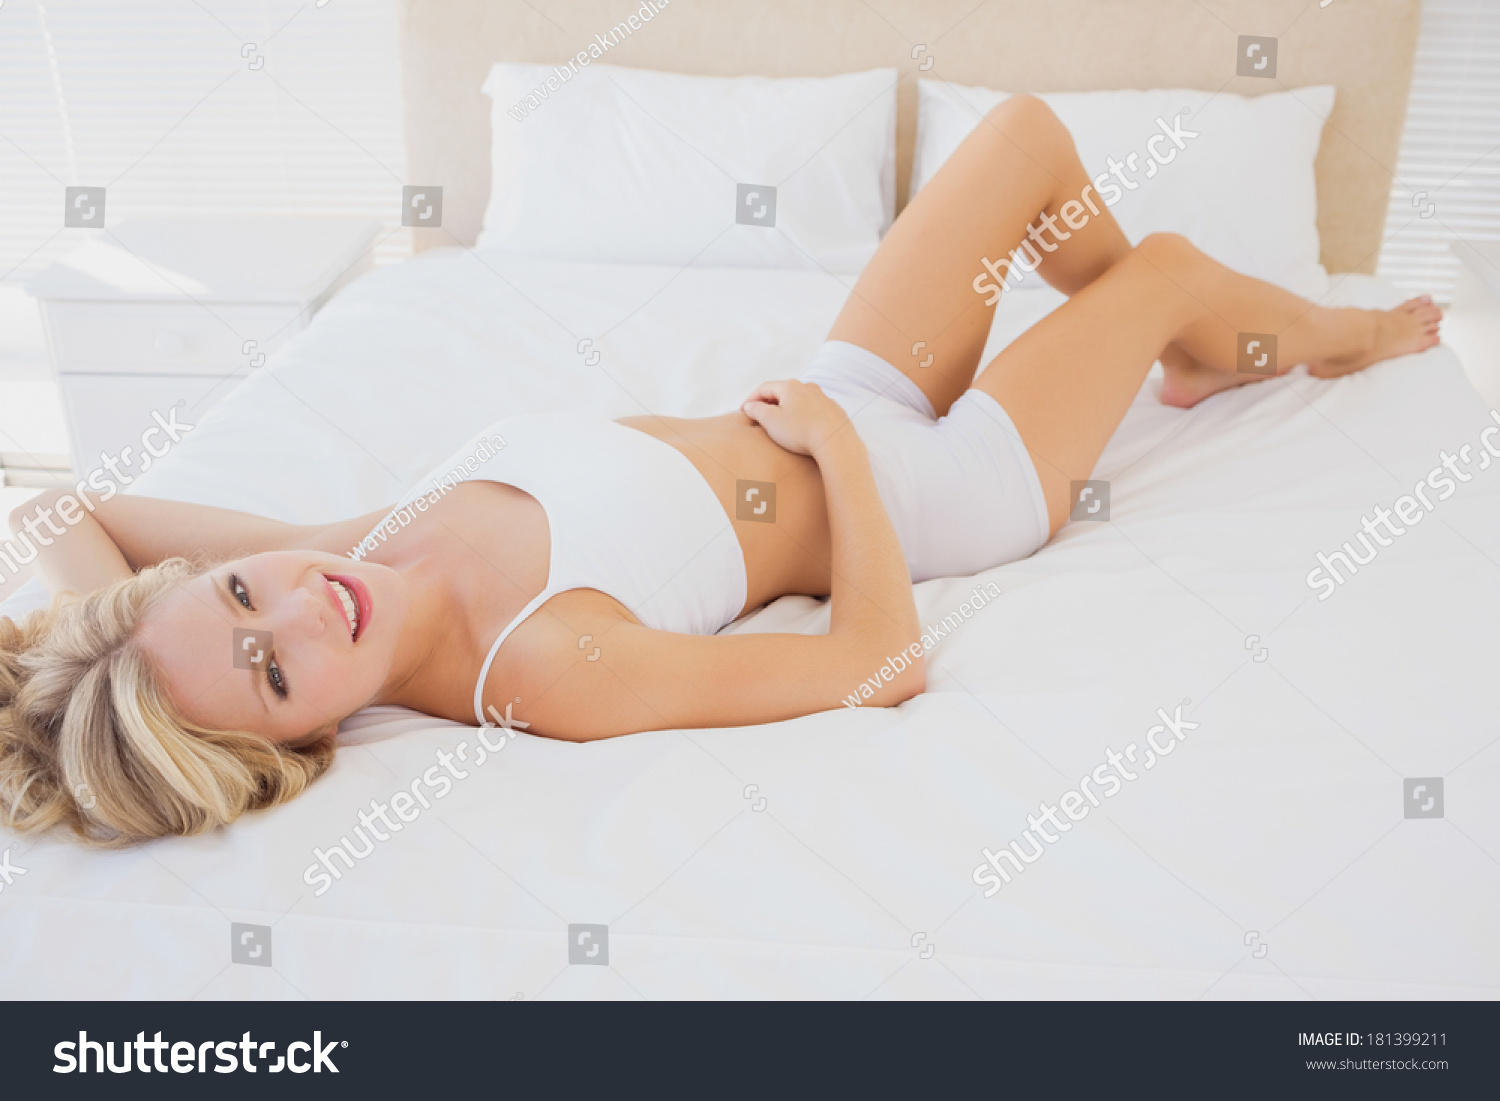 Sexy Blonde Woman Relaxing On Bed Stock Photo 181399211 Shutterstock